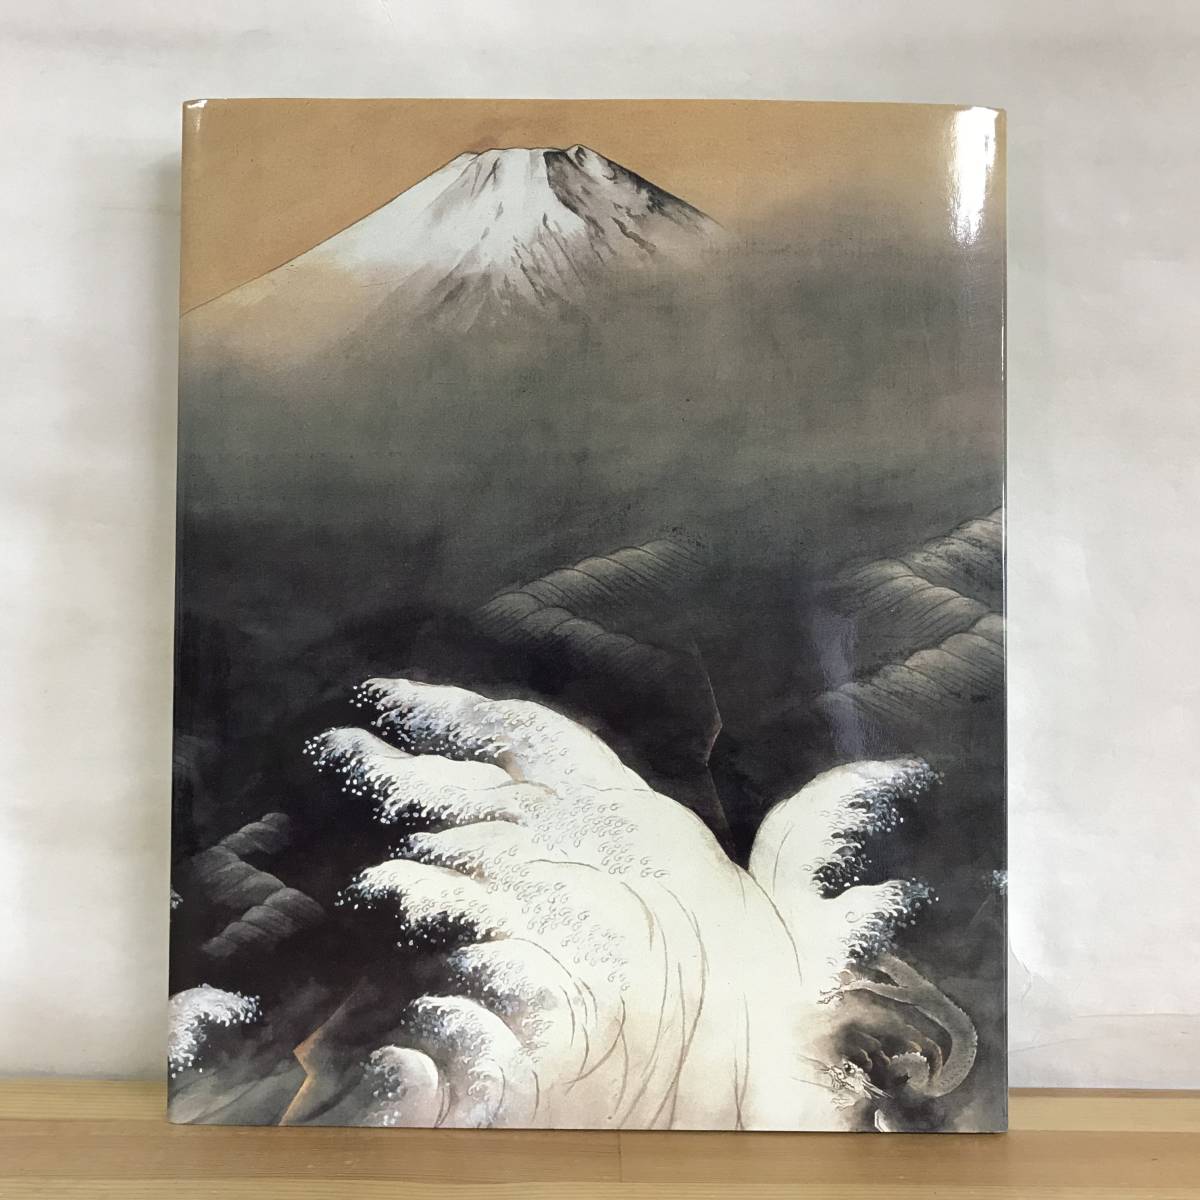 D07●Yokoyama Taikan: The World of Sea, Mountain, and Sky☆10 postcards included 1995 Hokkaido Museum of Modern Art Sapporo Television Broadcasting Catalog of works Catalog Painting in good condition 231013, Painting, Art Book, Collection, Catalog